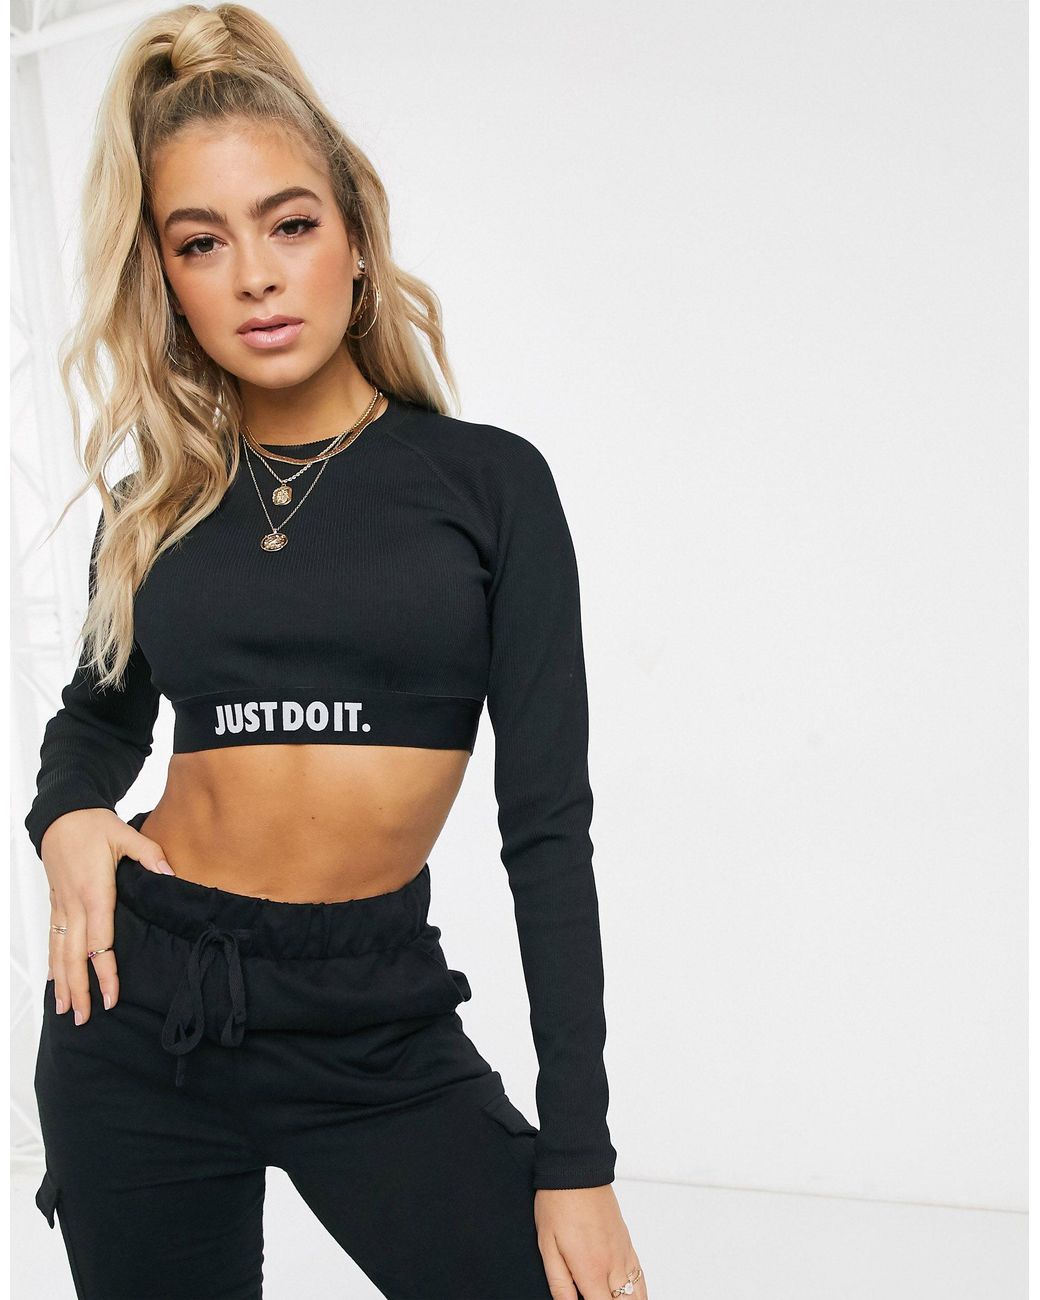 Nike Black Ribbed Just Do It Long Sleeve Crop Top | Lyst